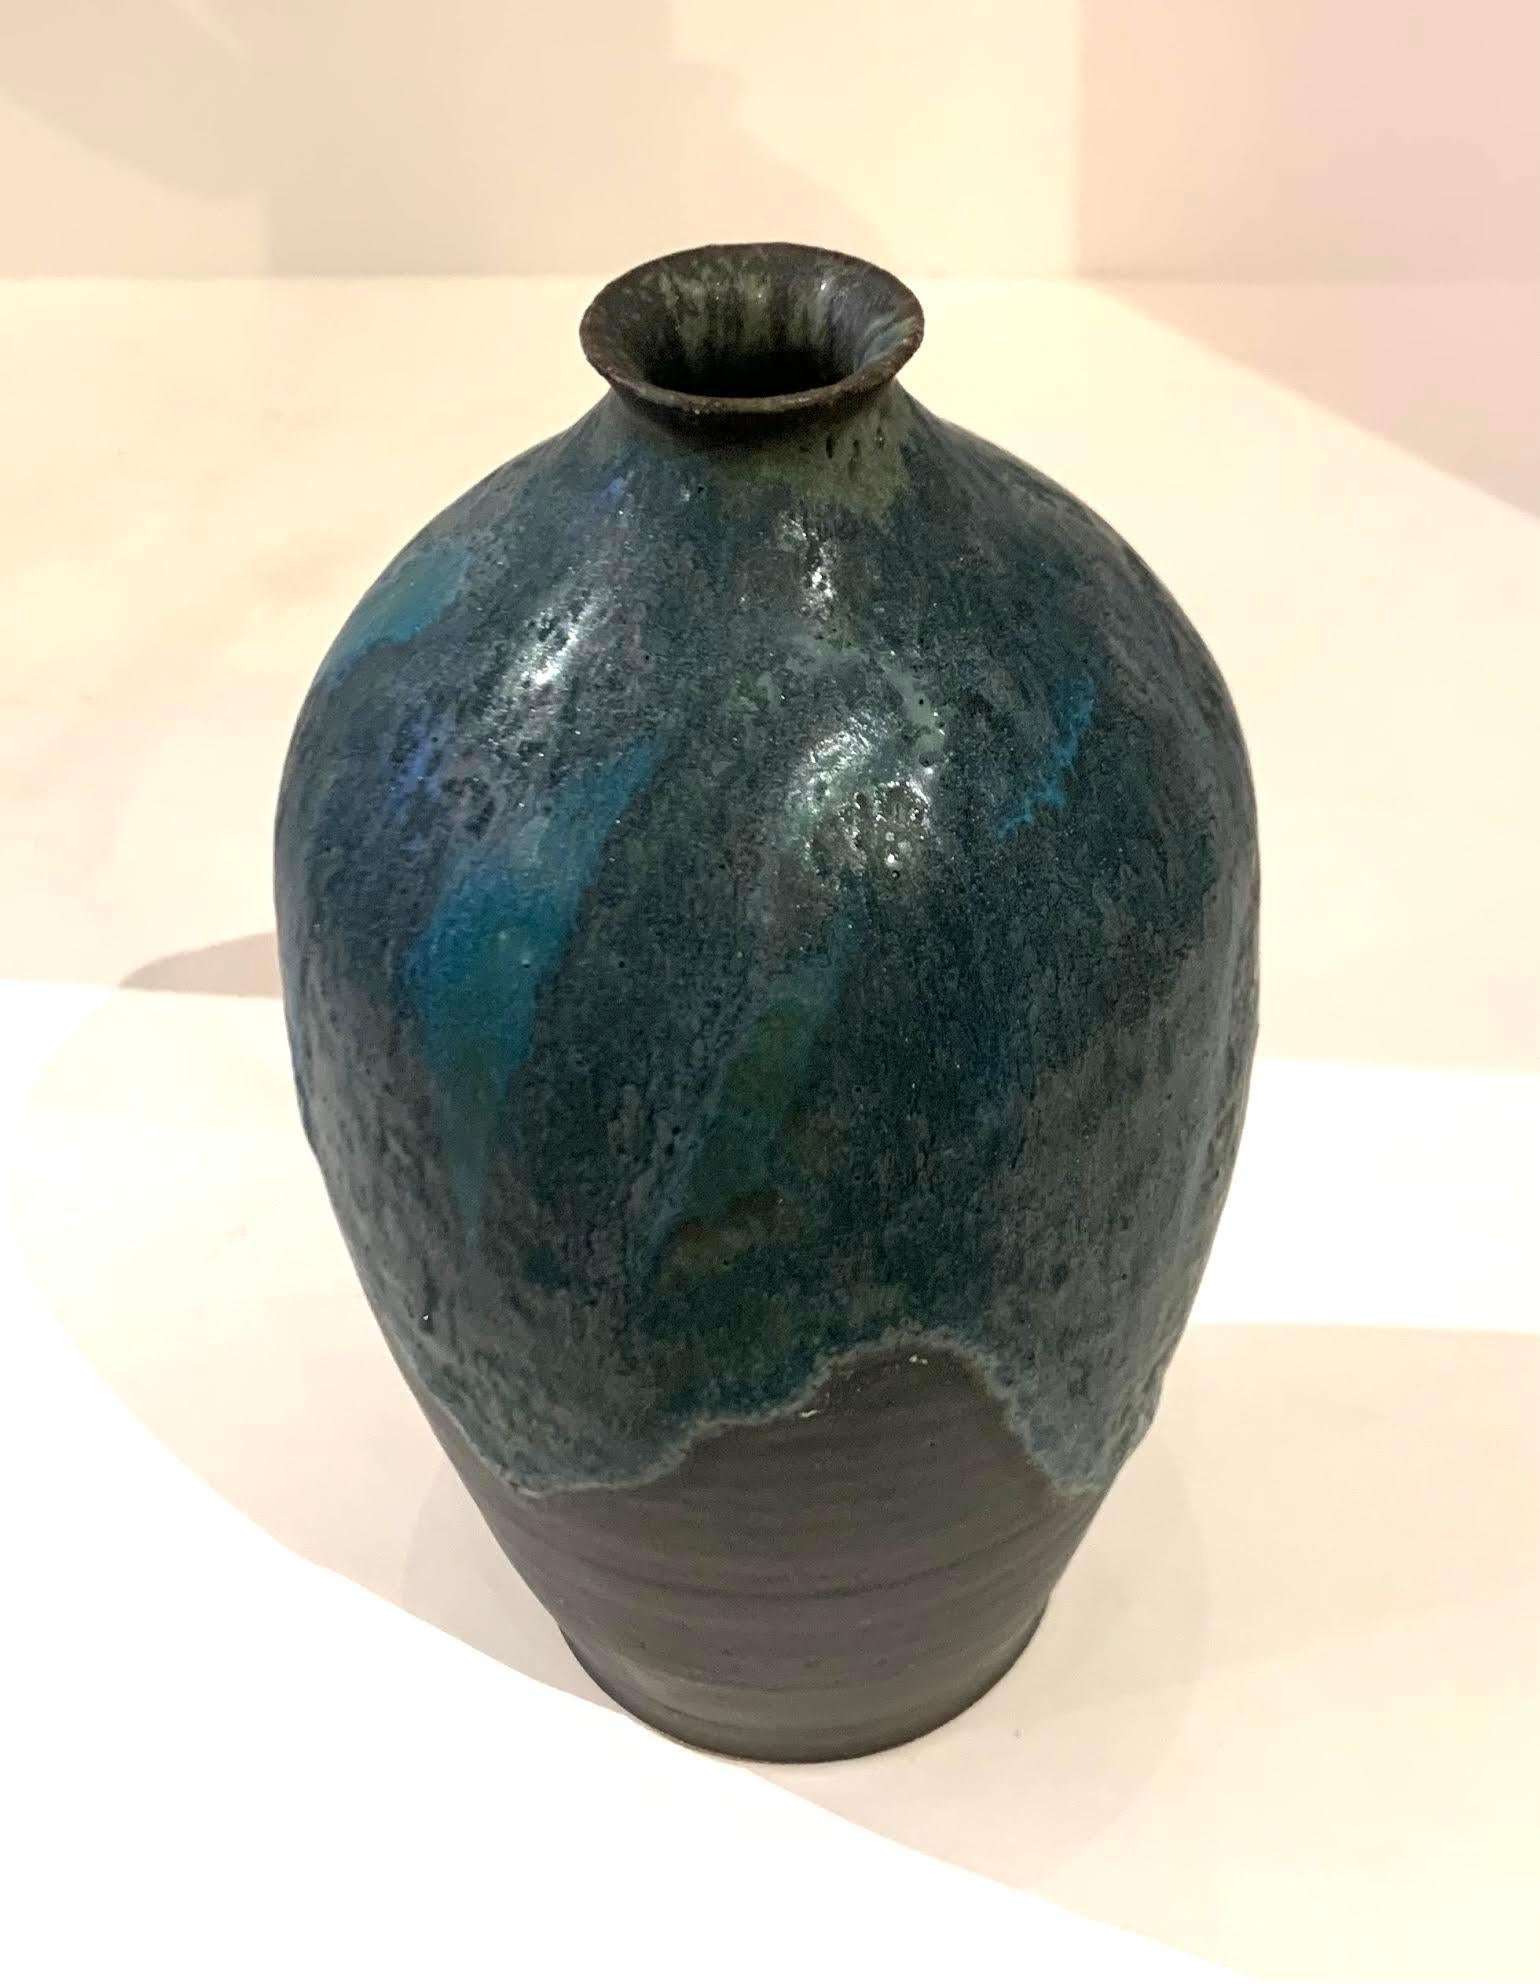 Contemporary American Ceramist Peter Speliopoulos stoneware vase.
One of many pieces from a large collection of work.
Sits nicely with S5828 thru S5835.
Signed by the artist.
The matte blue glaze, paired with an agate glaze, react to create